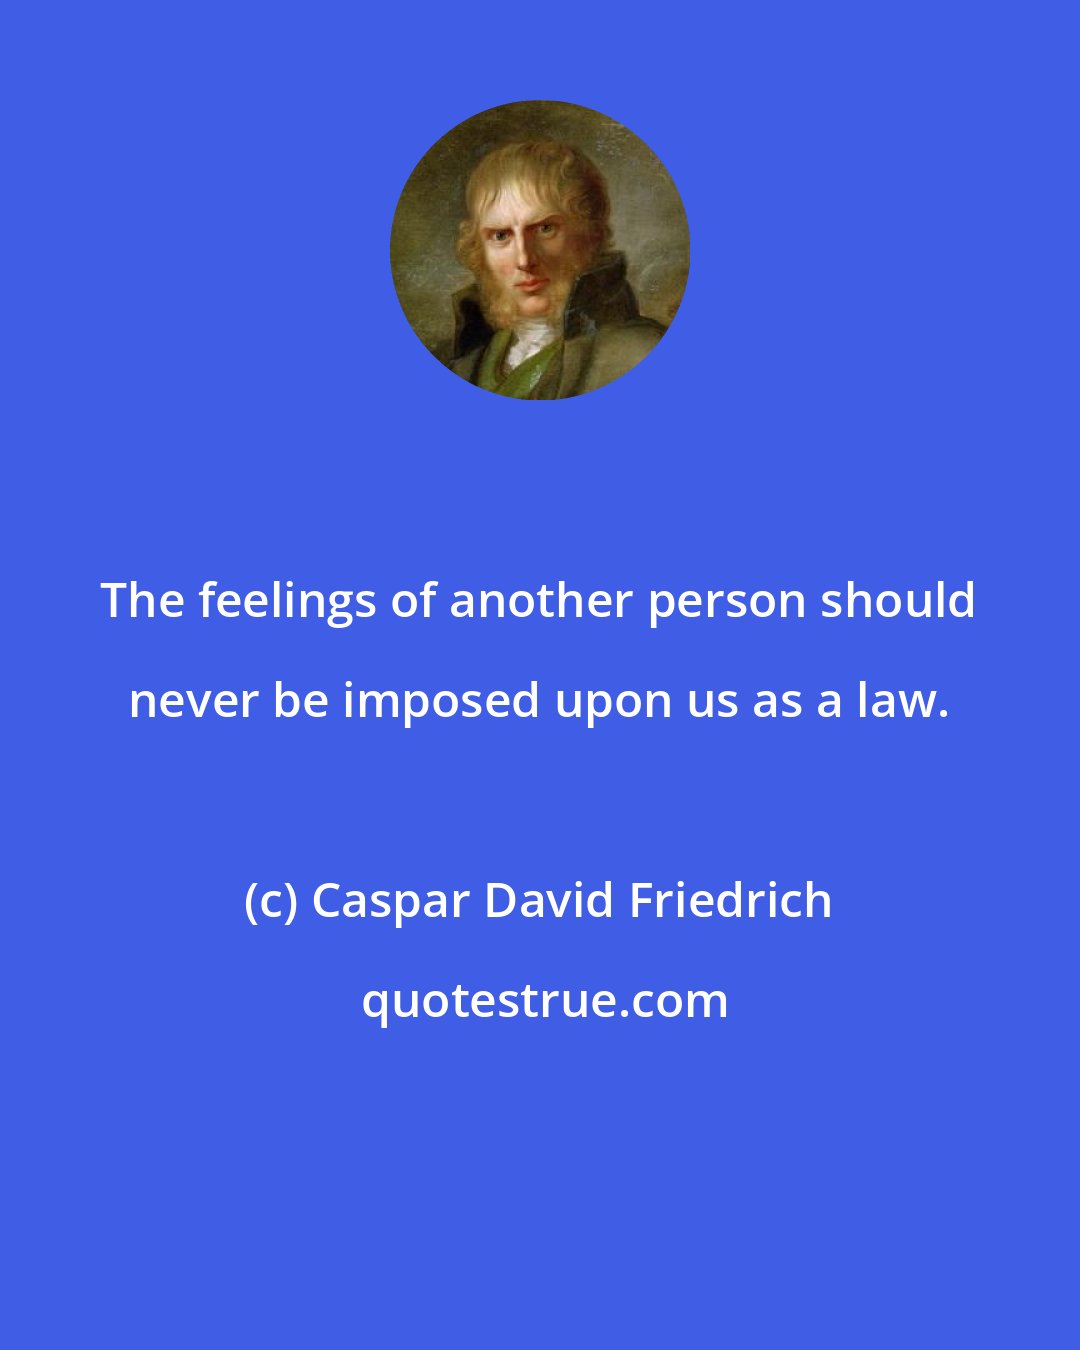 Caspar David Friedrich: The feelings of another person should never be imposed upon us as a law.